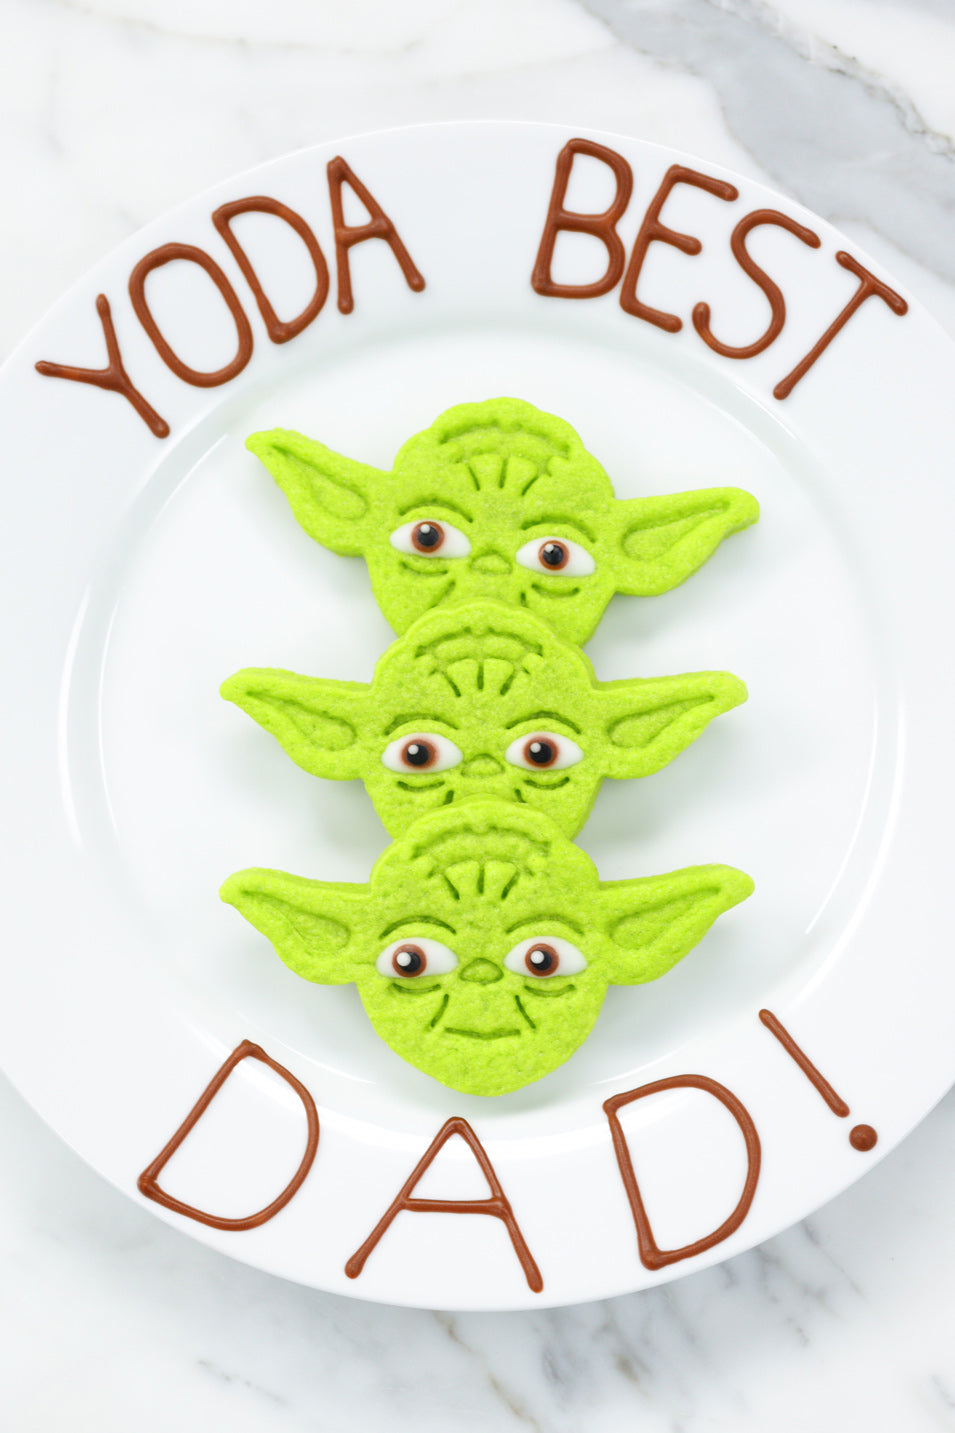 Yoda Cookies for Father's Day